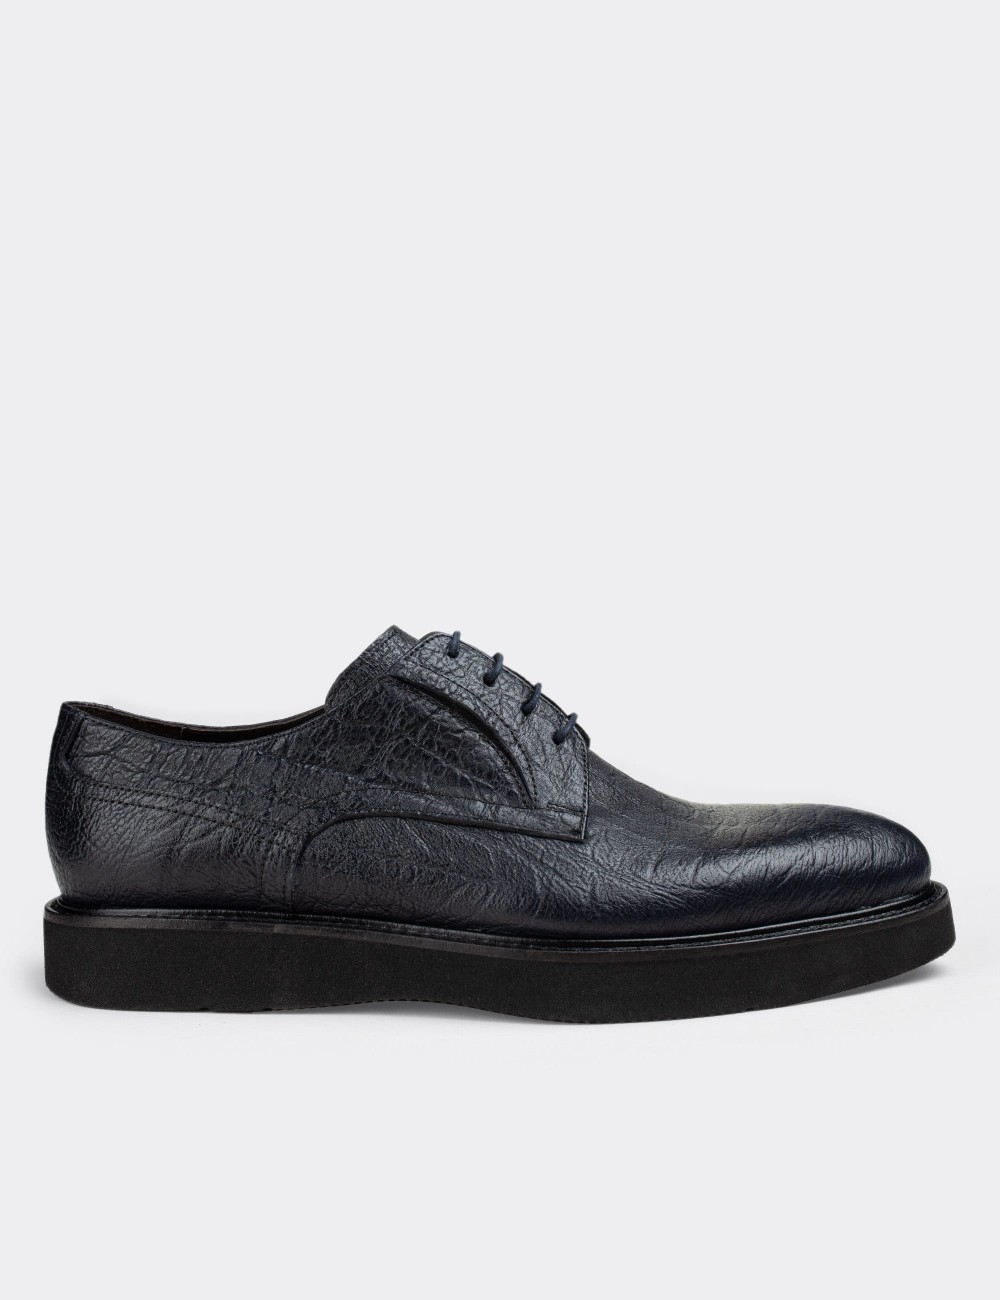 Navy  Leather Lace-up Shoes - 01294MLCVE24